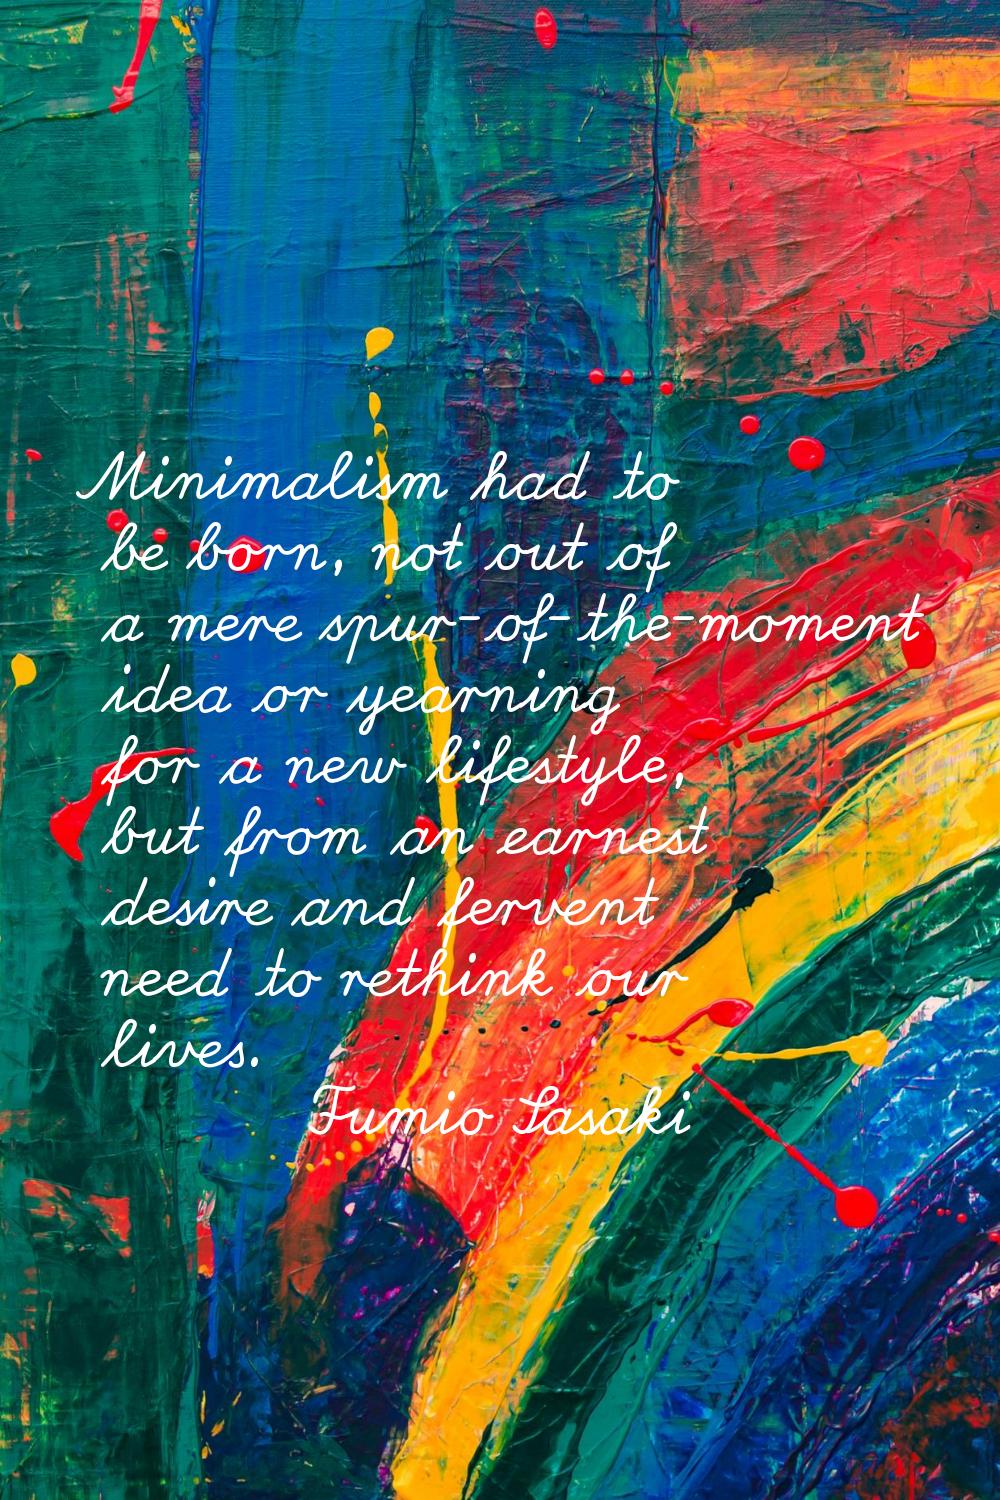 Minimalism had to be born, not out of a mere spur-of-the-moment idea or yearning for a new lifestyl